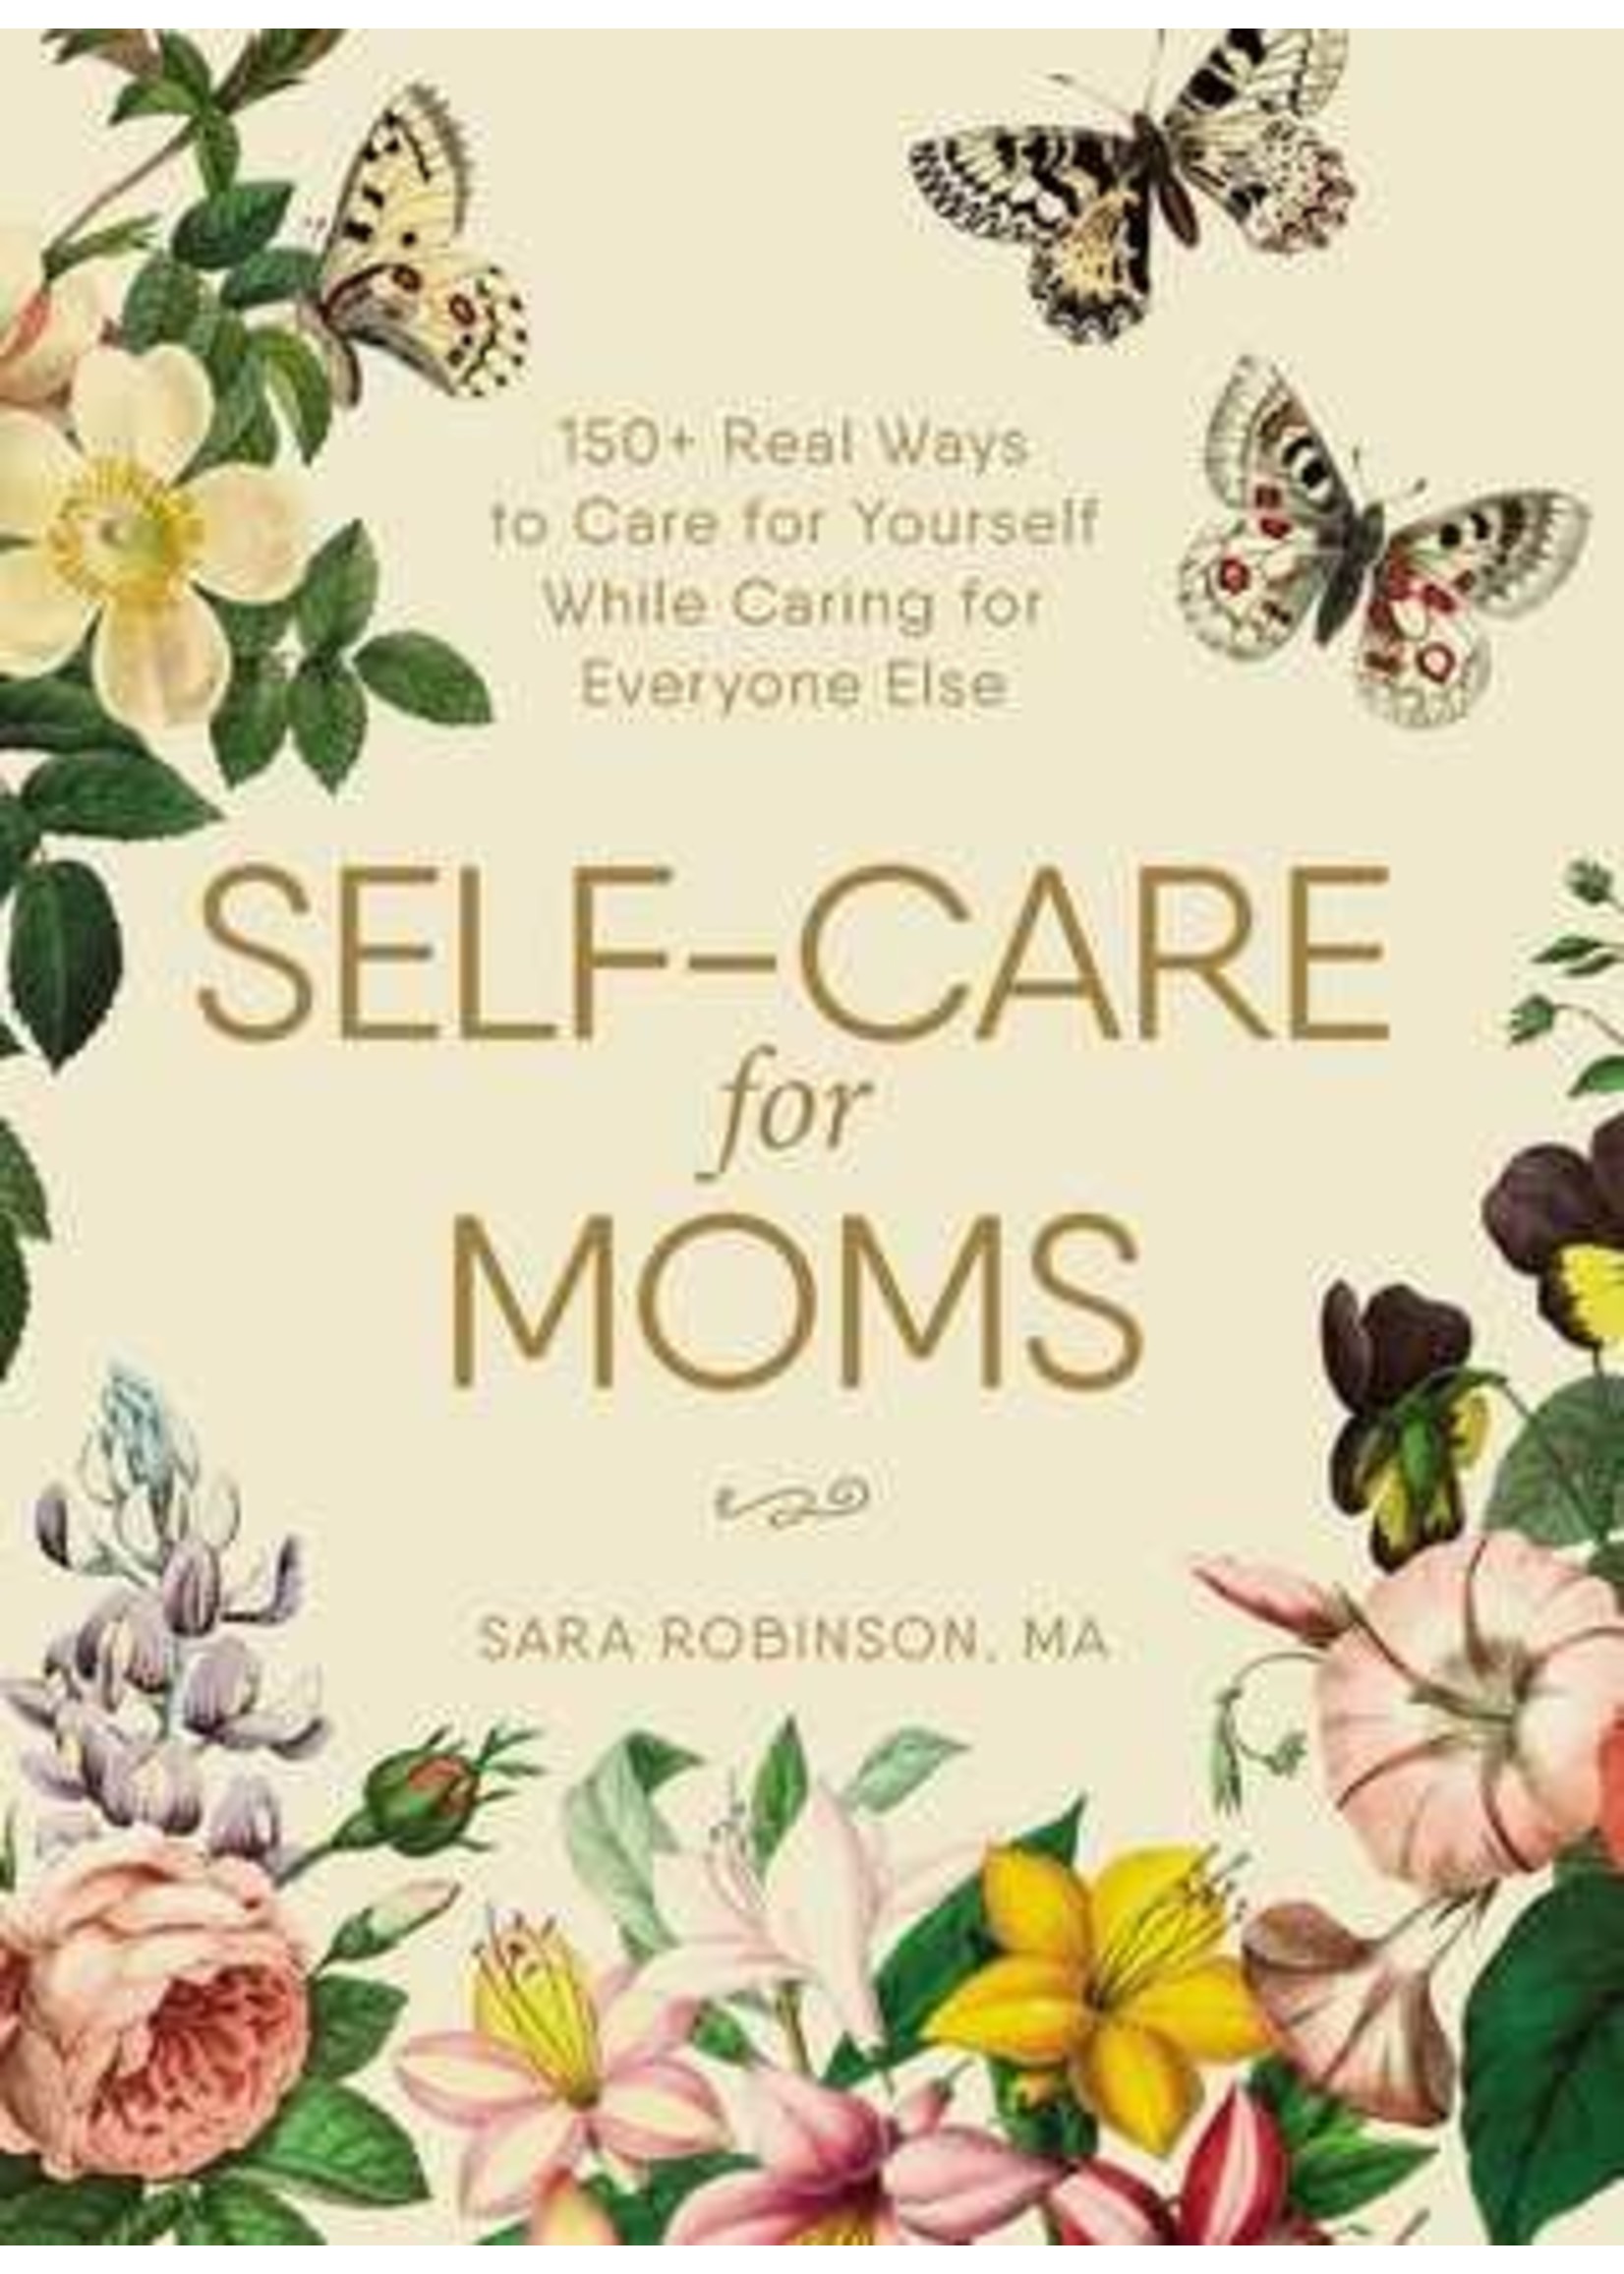 Self-Care for Moms: 150+ Real Ways to Care for Yourself While Caring for Everyone Else by Sara Robinson